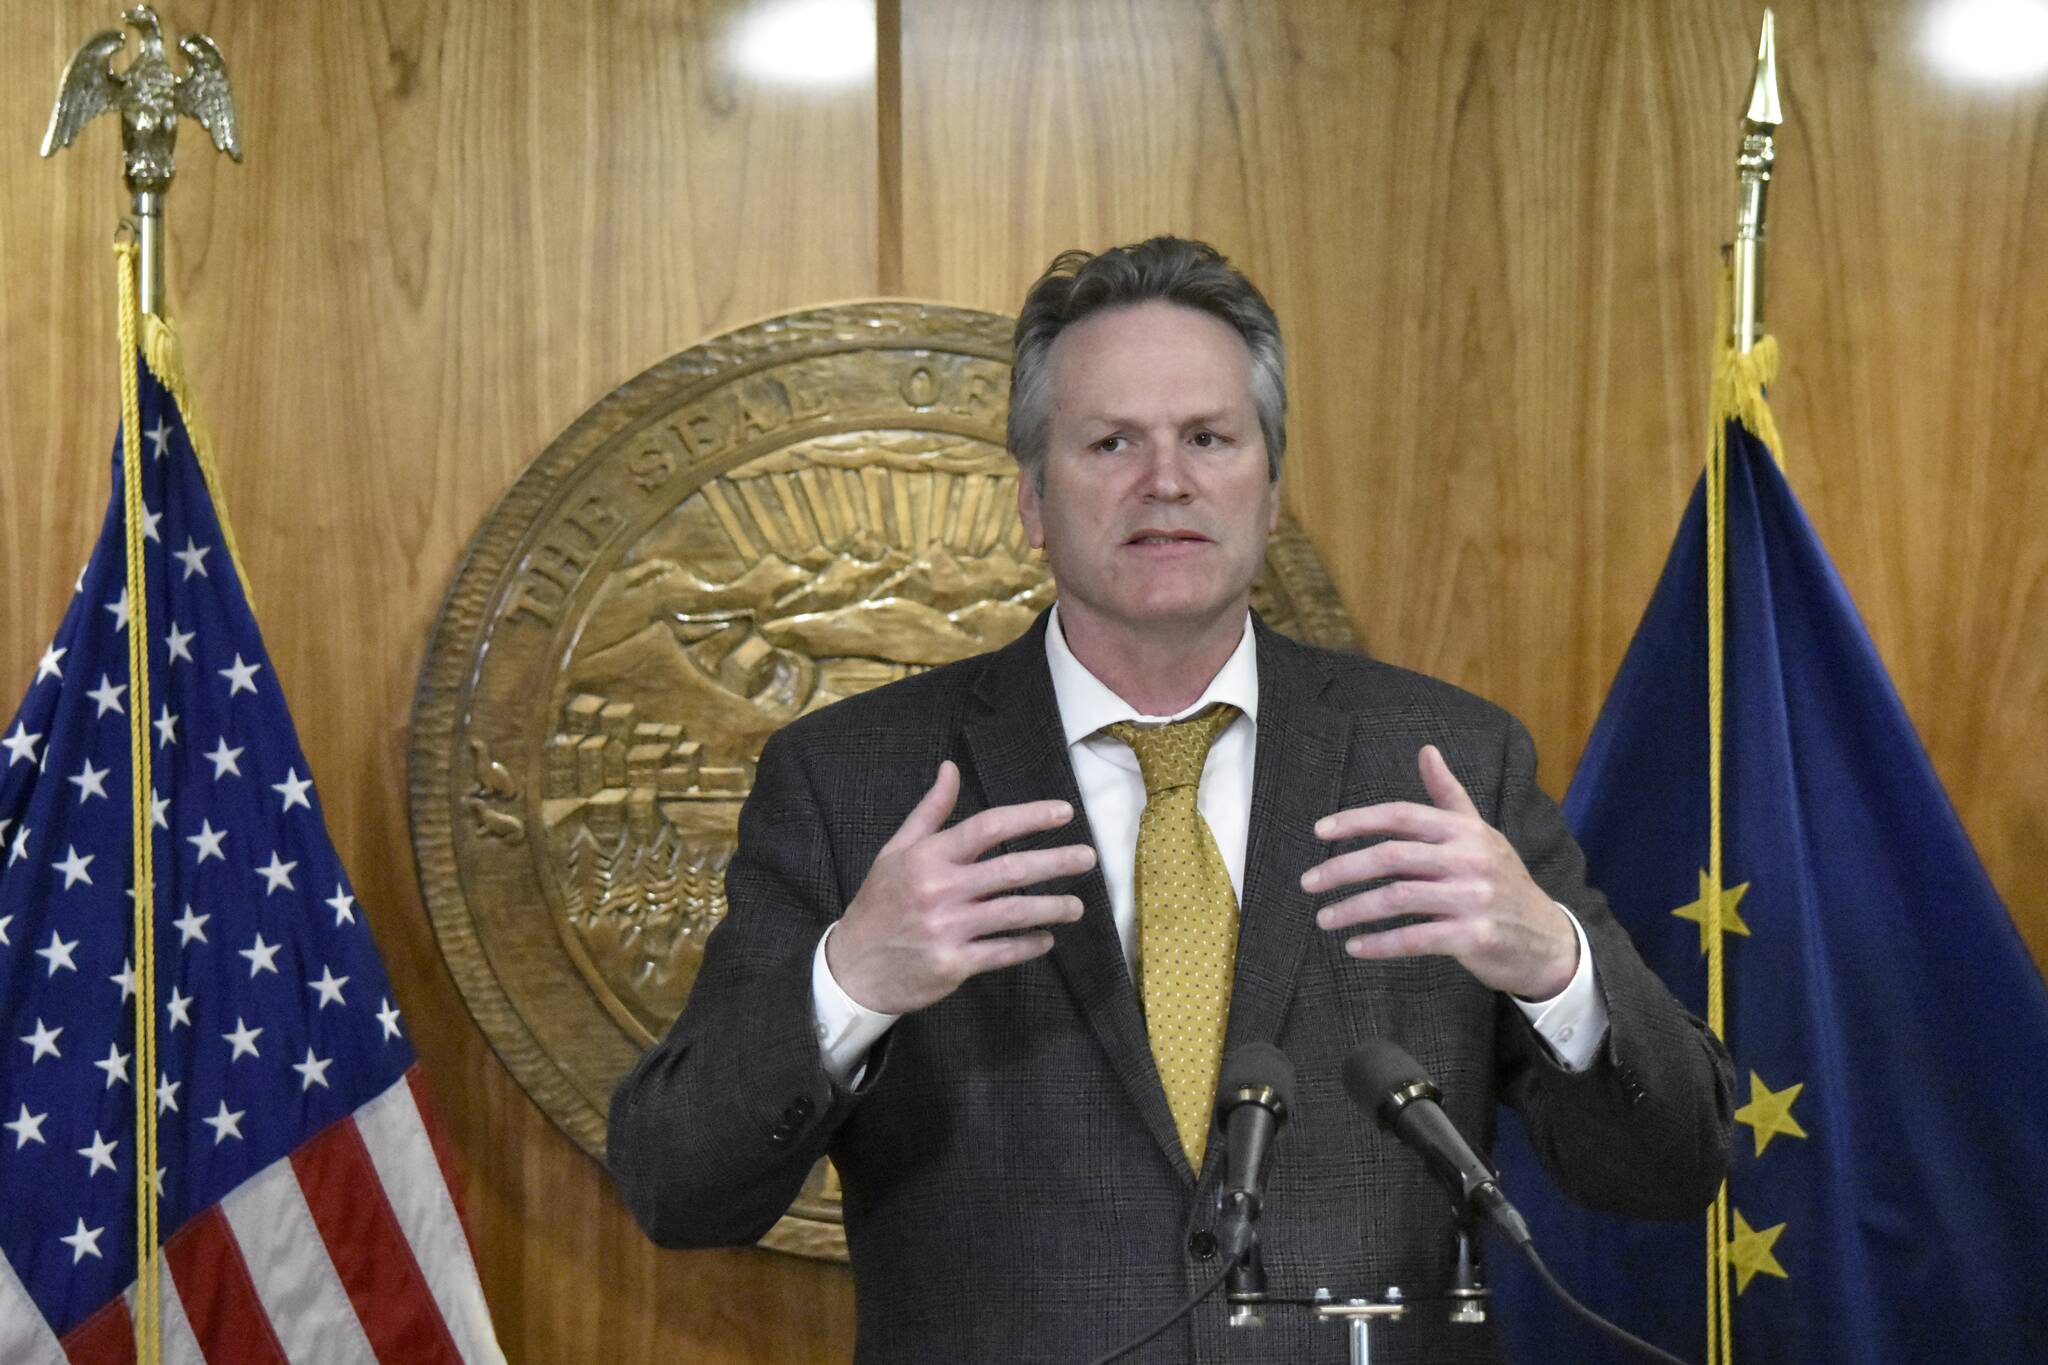 Gov. Mike Dunleavy speaks with reporters about the state’s budget at the Alaska State Capitol on Thursday, May 19, 2022. The governor said lawmakers had sent a complete budget, and that there was no need for a special session. (Peter Segall / Juneau Empire)